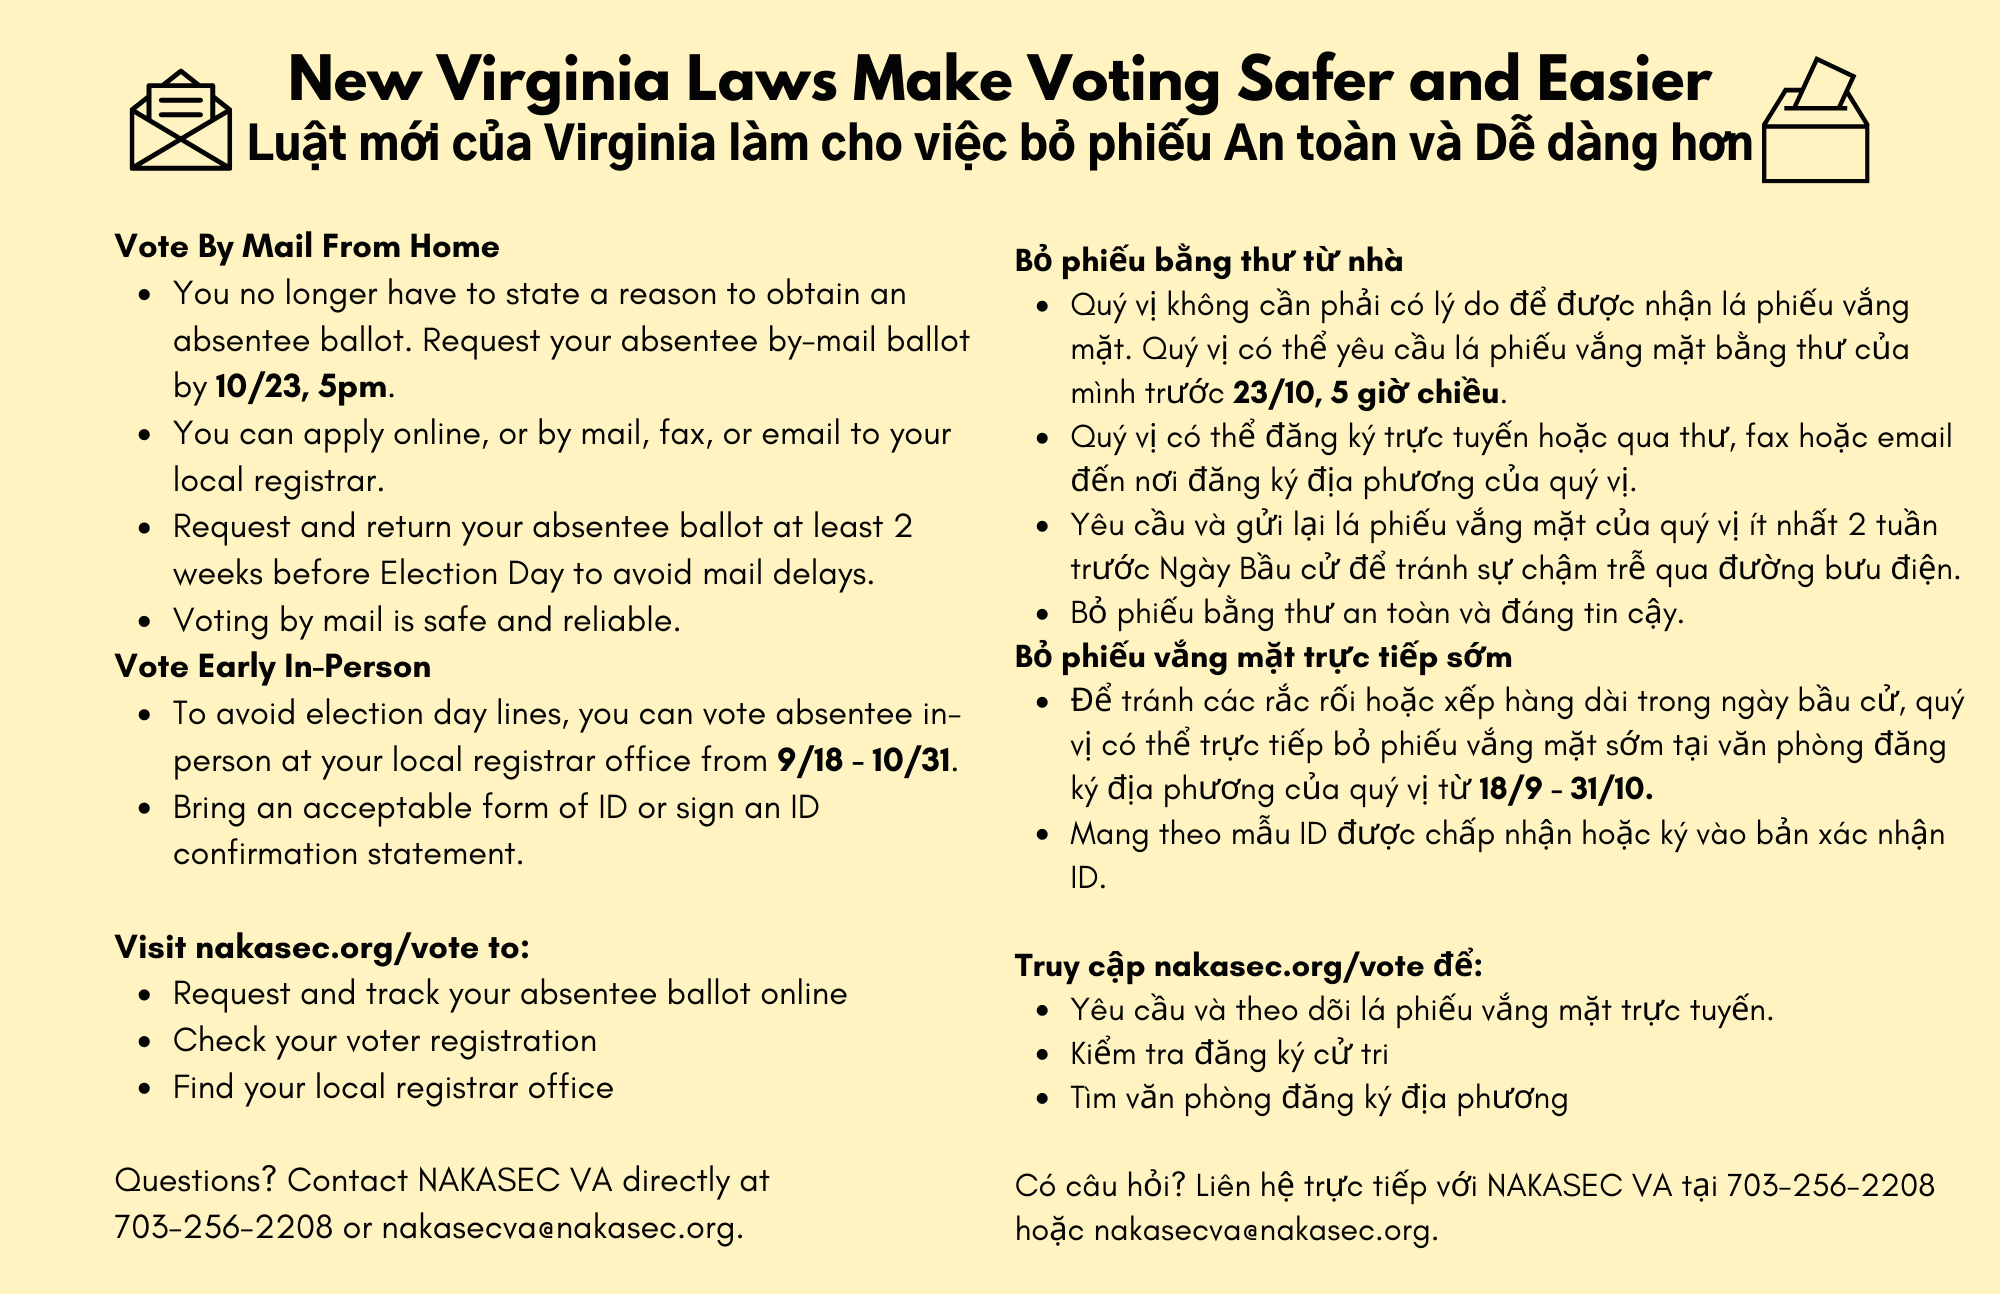 New Virginia Laws Make Voting Safer and Easier; translated to Vietnamese